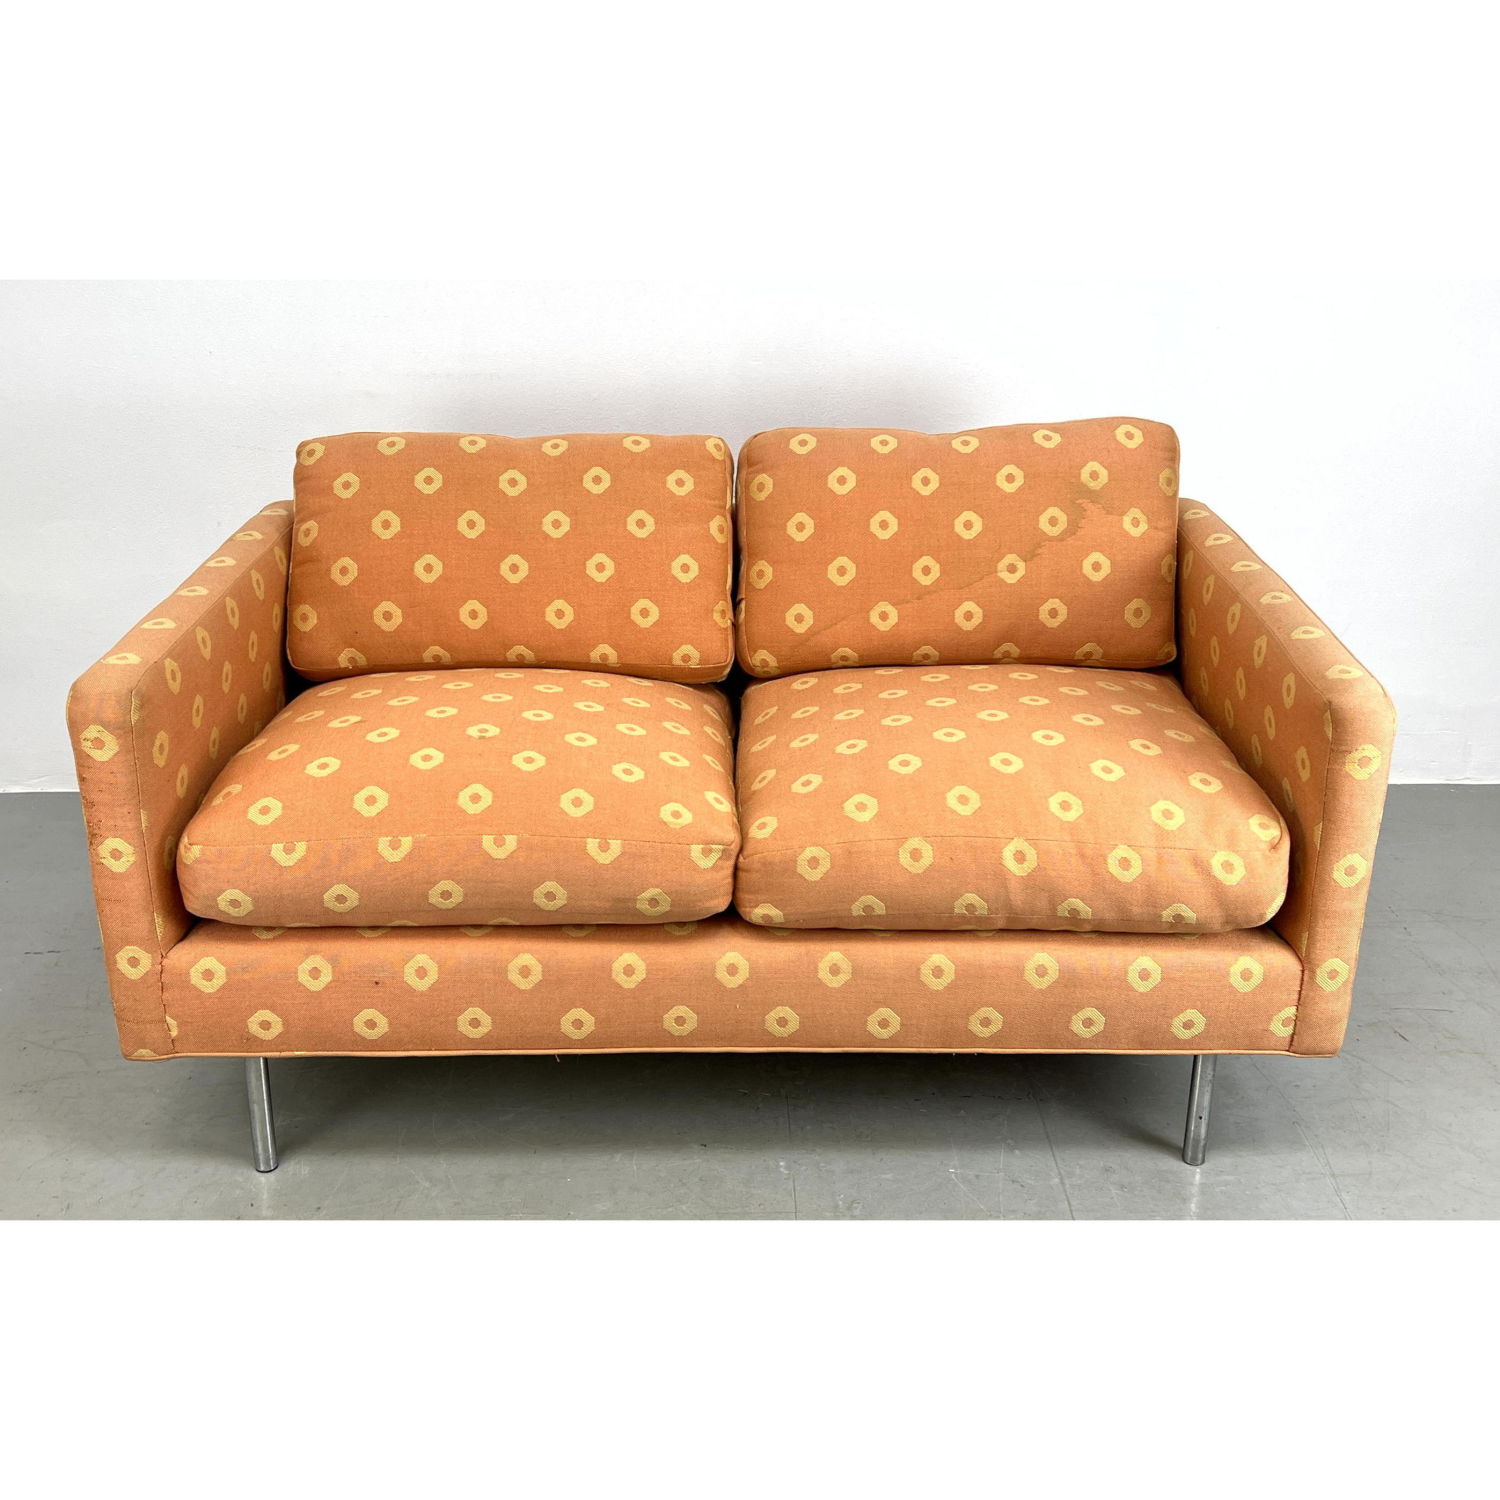 Patterned Upholstered Love Seat  2b9808